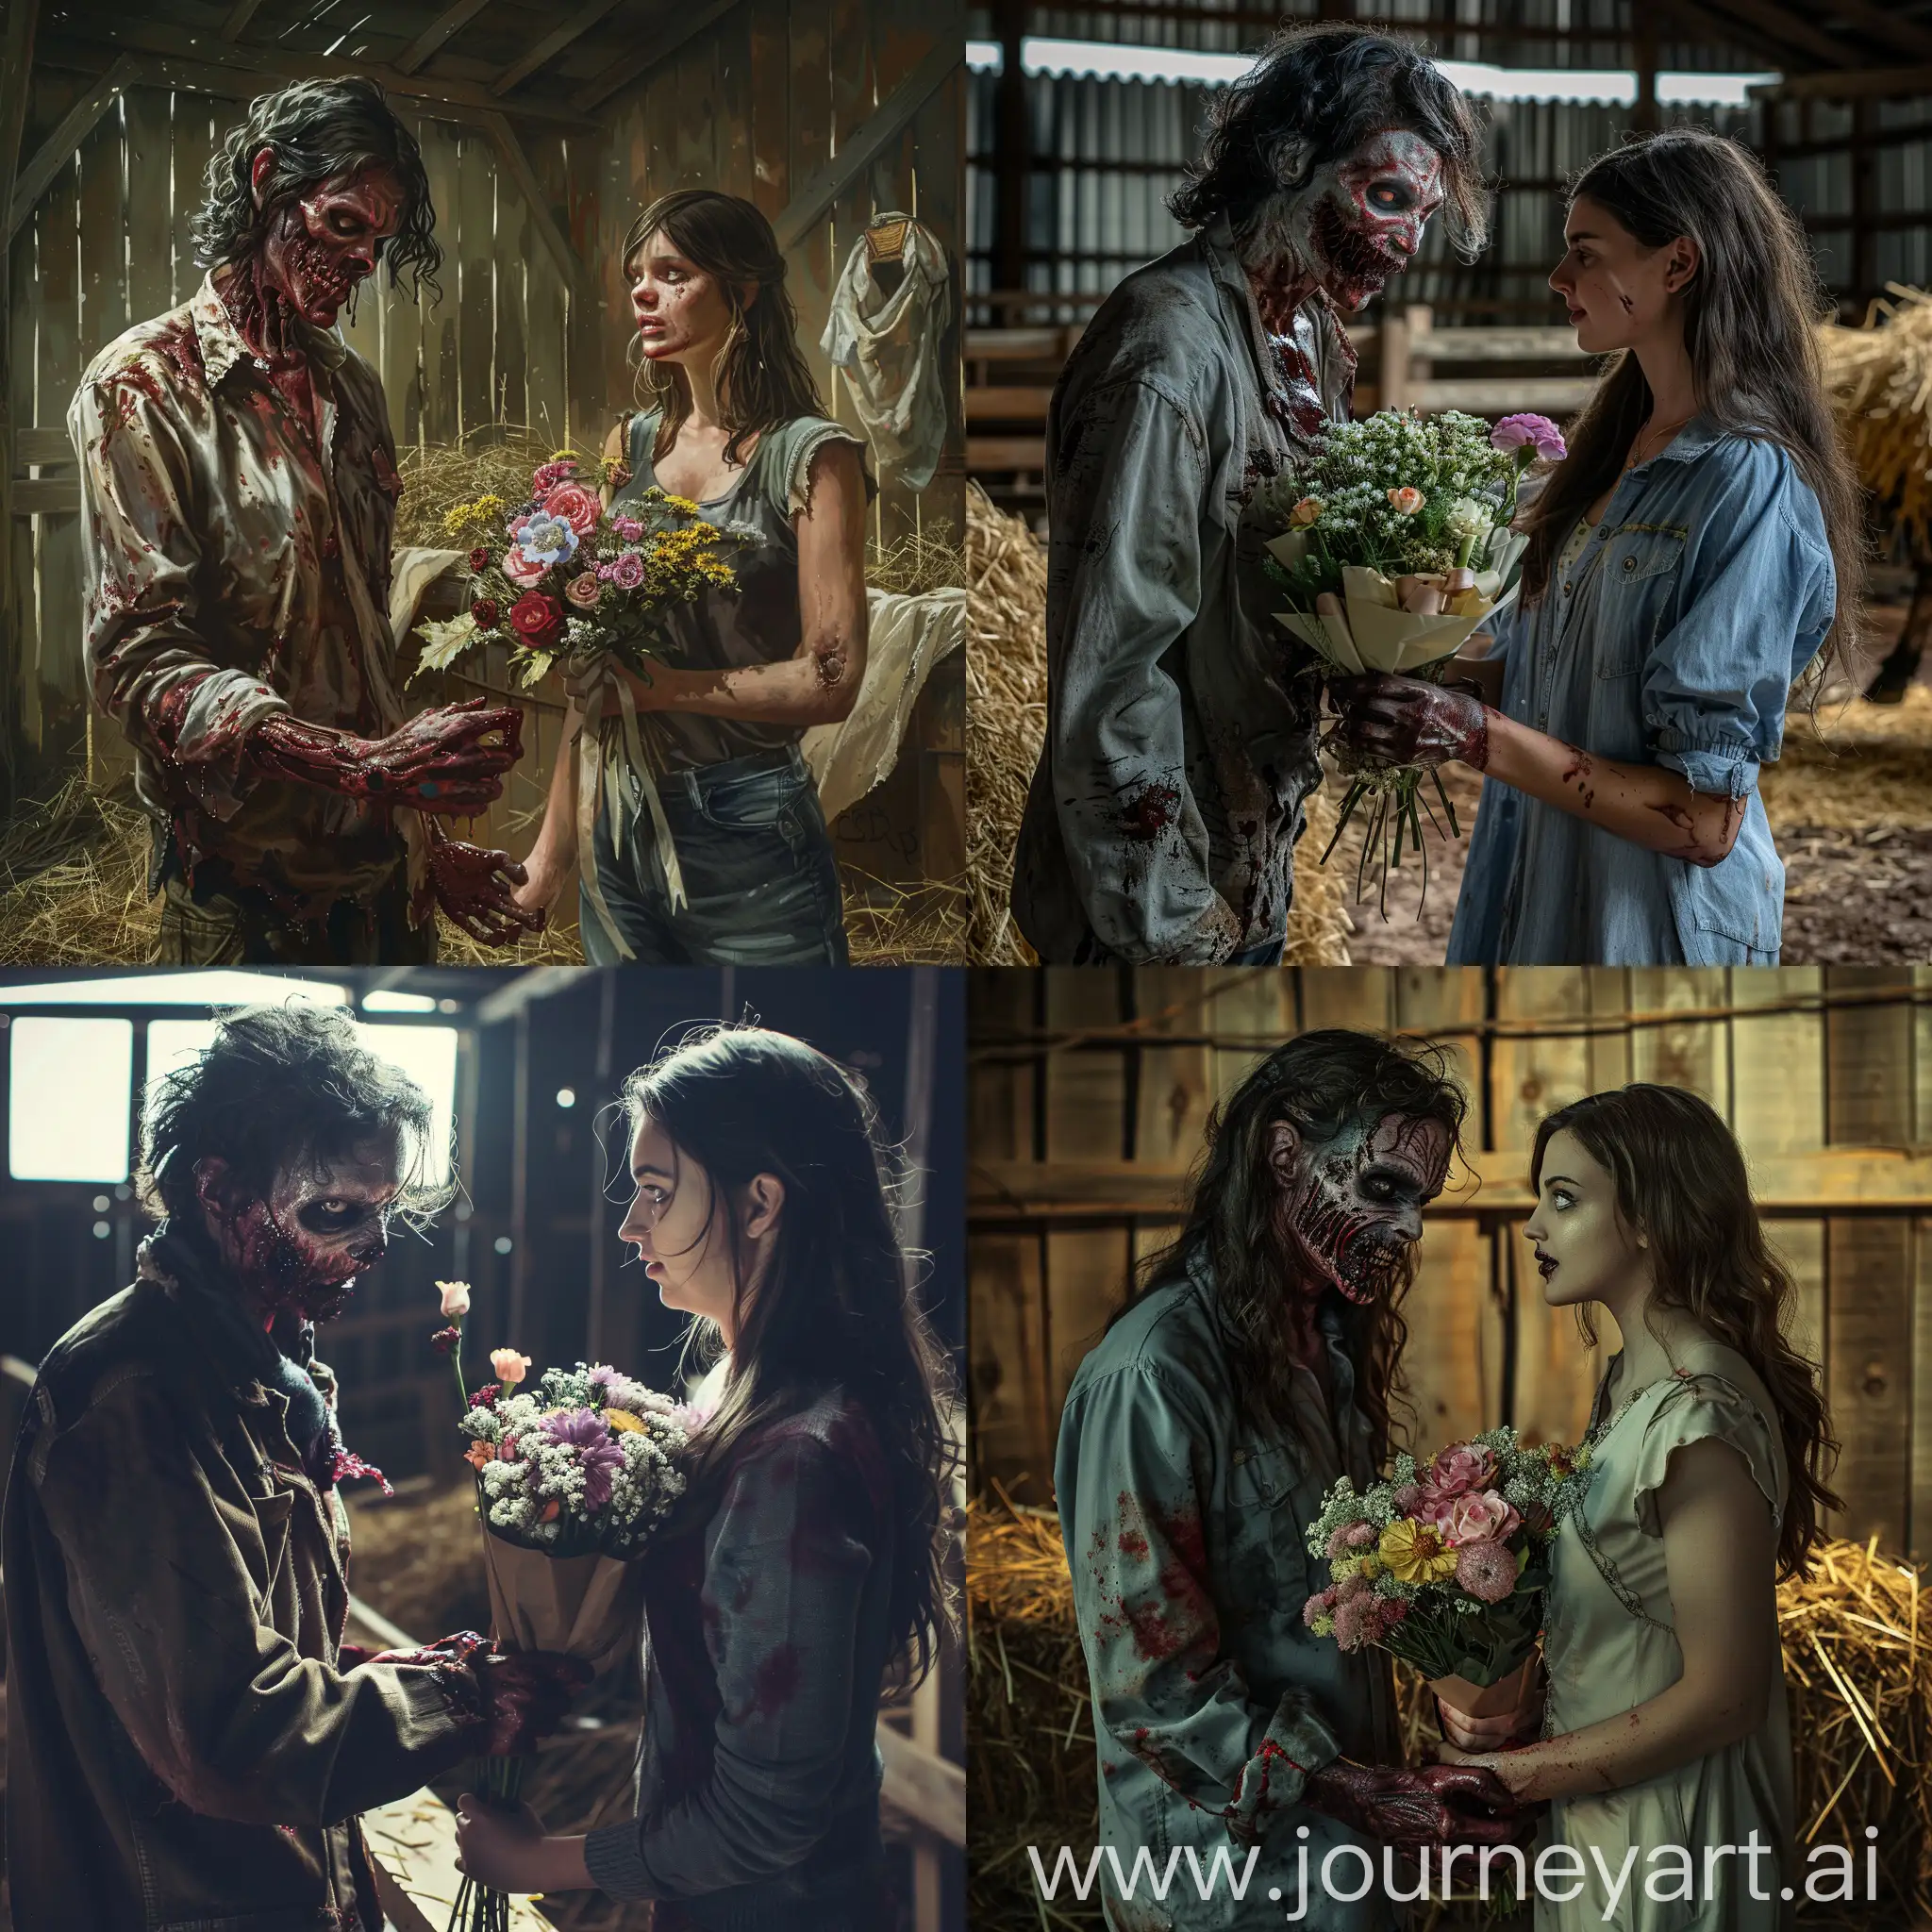 Romantic-Encounter-Zombie-Offering-Bloody-Flowers-to-Brunette-in-Stable